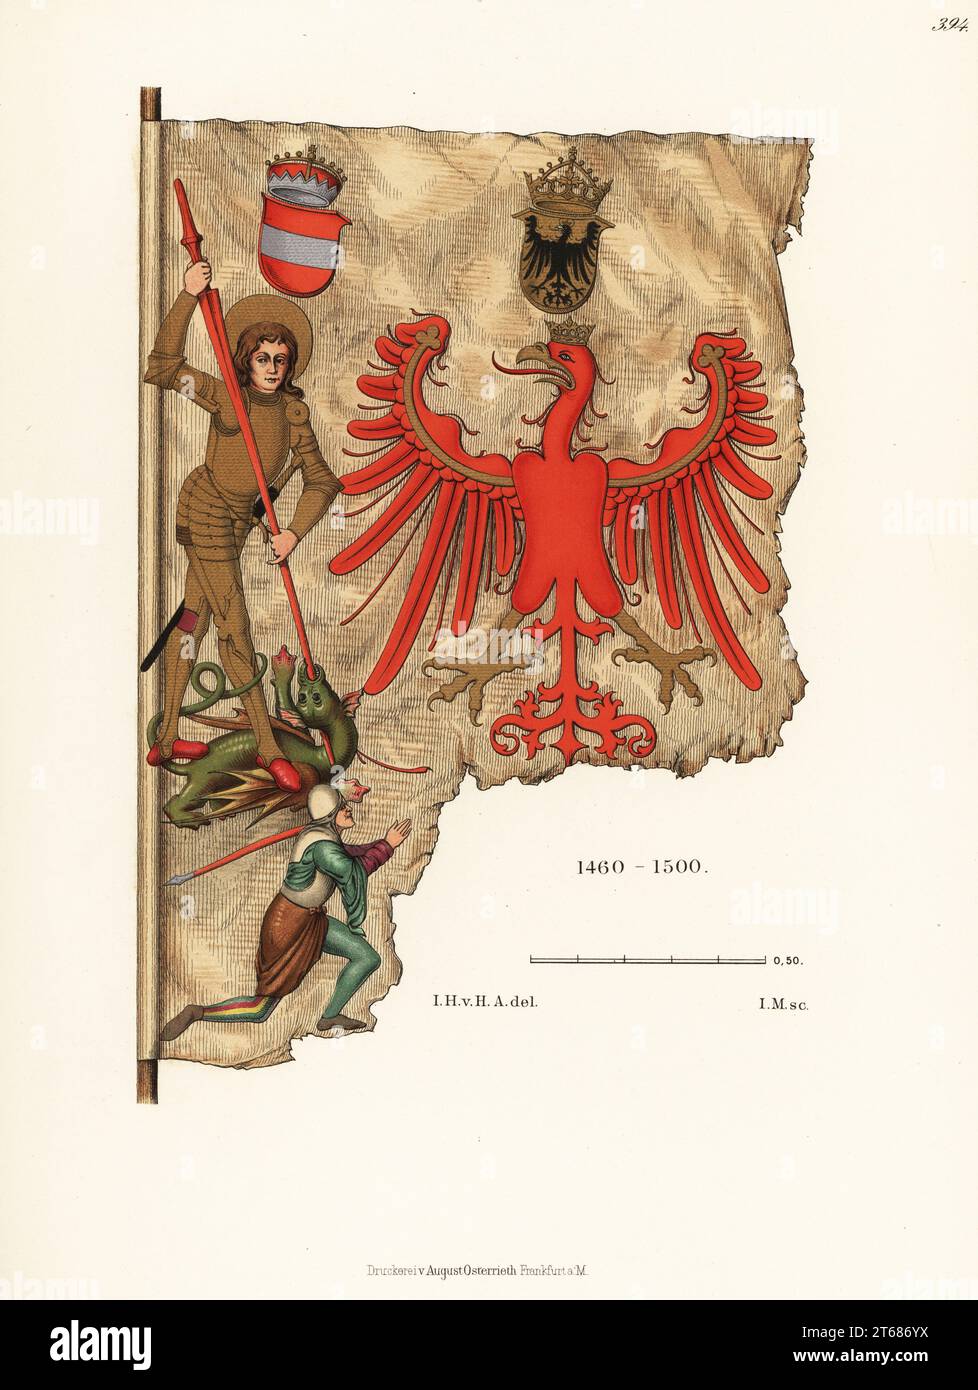 Fragment of a banner of silver and copper miners from Tyrol, late 15th century. St. George kills a dragon next to a scarlet eagle. Chromolithograph from Hefner-Alteneck's Costumes, Artworks and Appliances from the Middle Ages to the 17th Century, Frankfurt, 1889. Illustration by Dr. Jakob Heinrich von Hefner-Alteneck, lithographed by I.M. Dr. Hefner-Alteneck (1811 - 1903) was a German museum curator, archaeologist, art historian, illustrator and etcher. Stock Photo